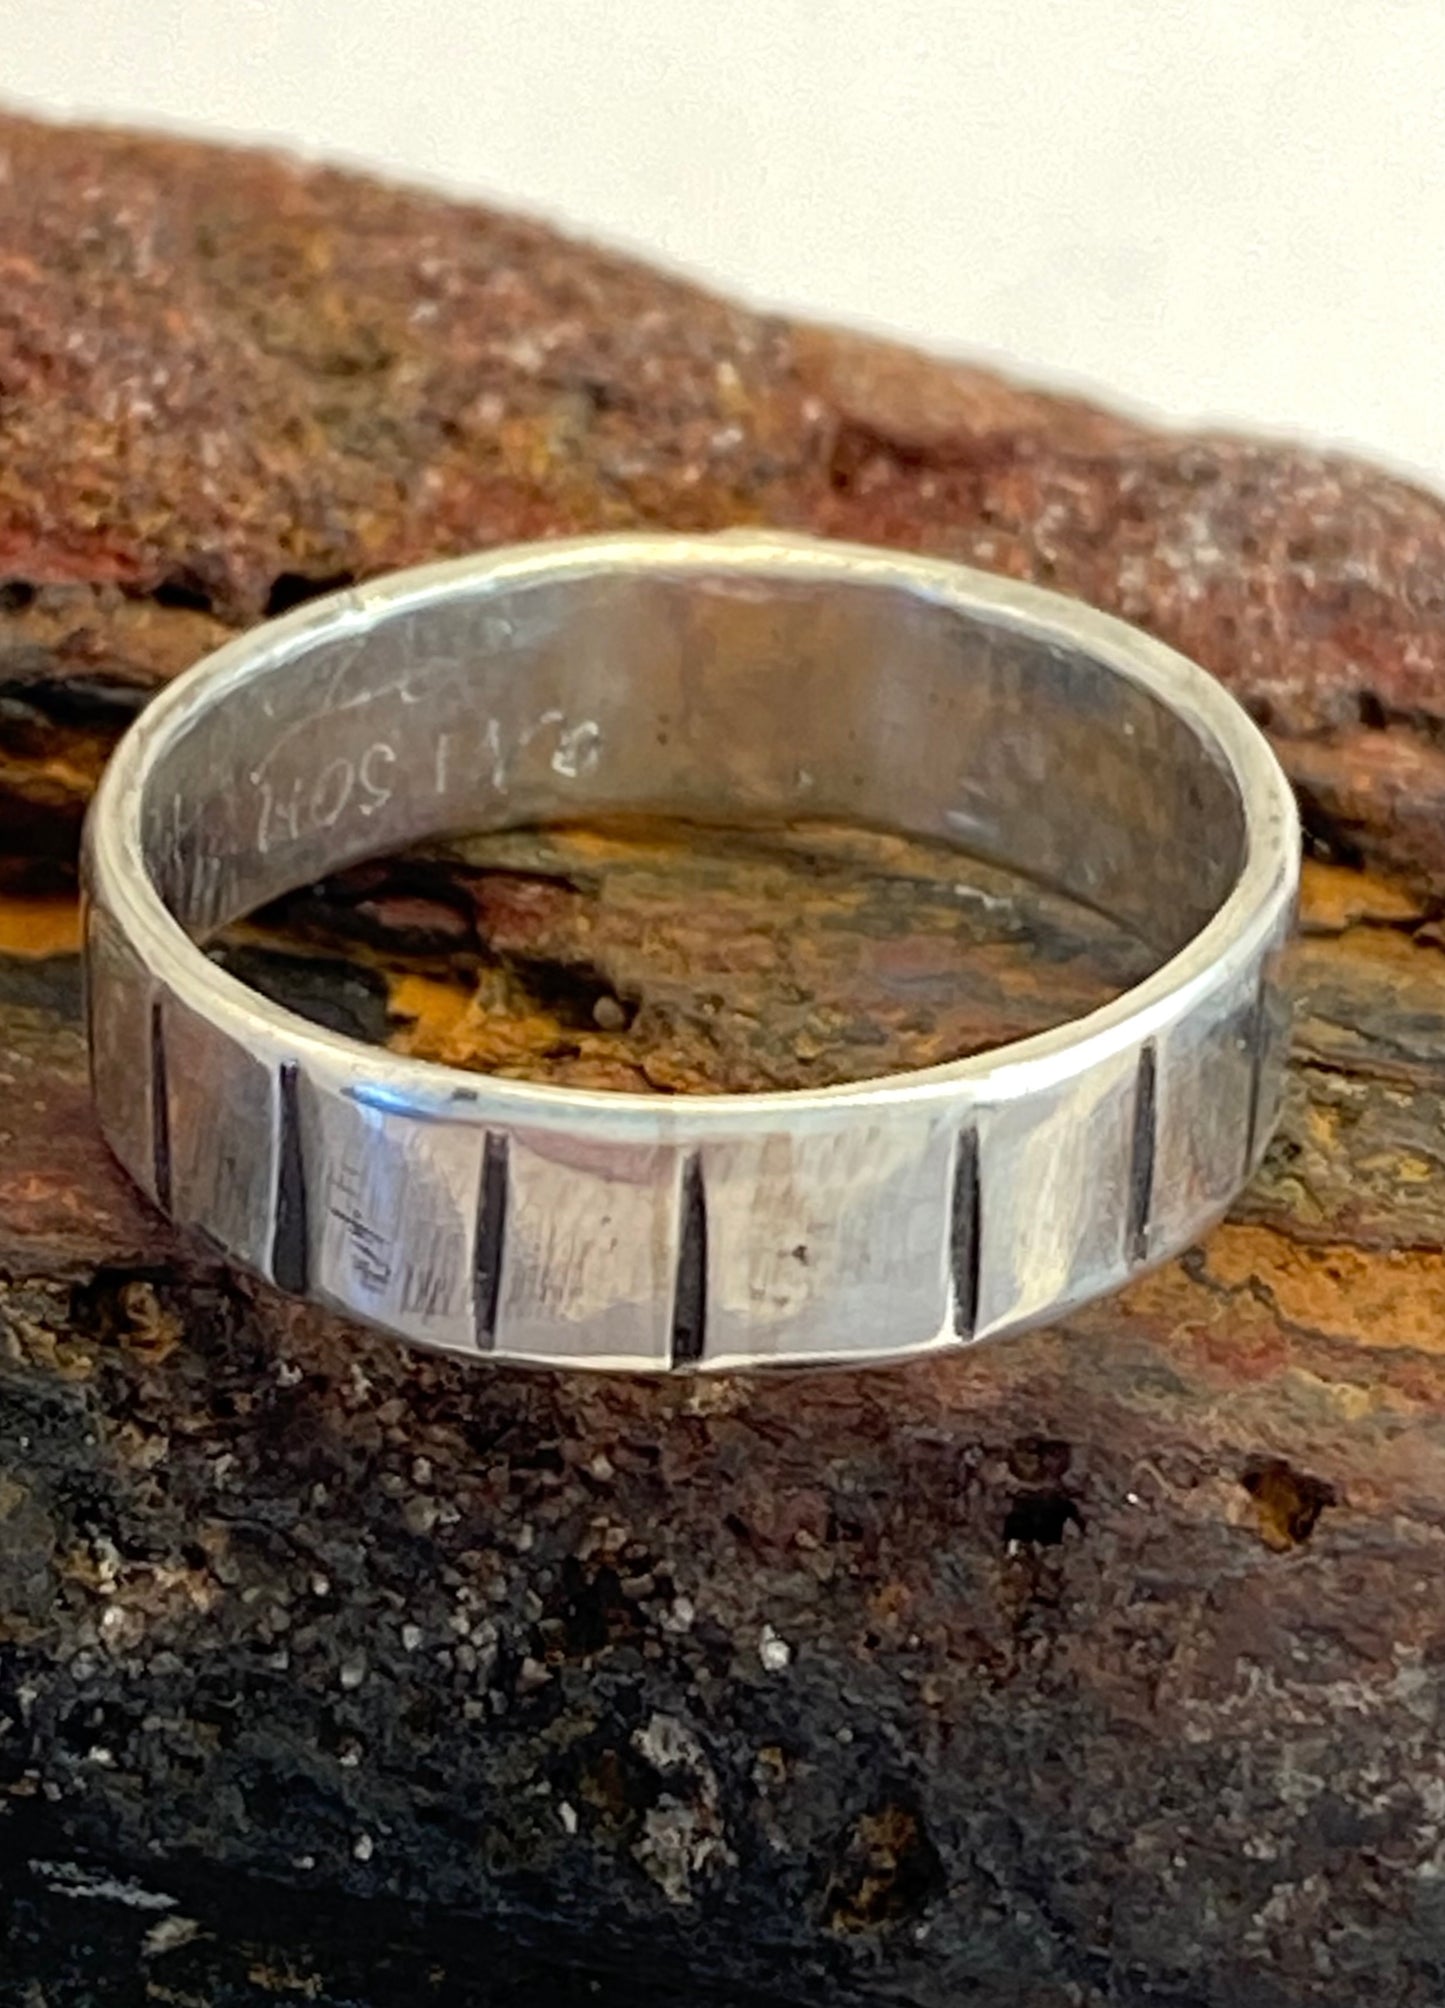      This one-of-a-kind sterling silver ring is adorned with a 14k gold disk and a stamped line pattern around the band.      Ring size 6-14.  Band is 3/16" wide.     Style: rustic, boho, funky, organic, earthy yet elegant